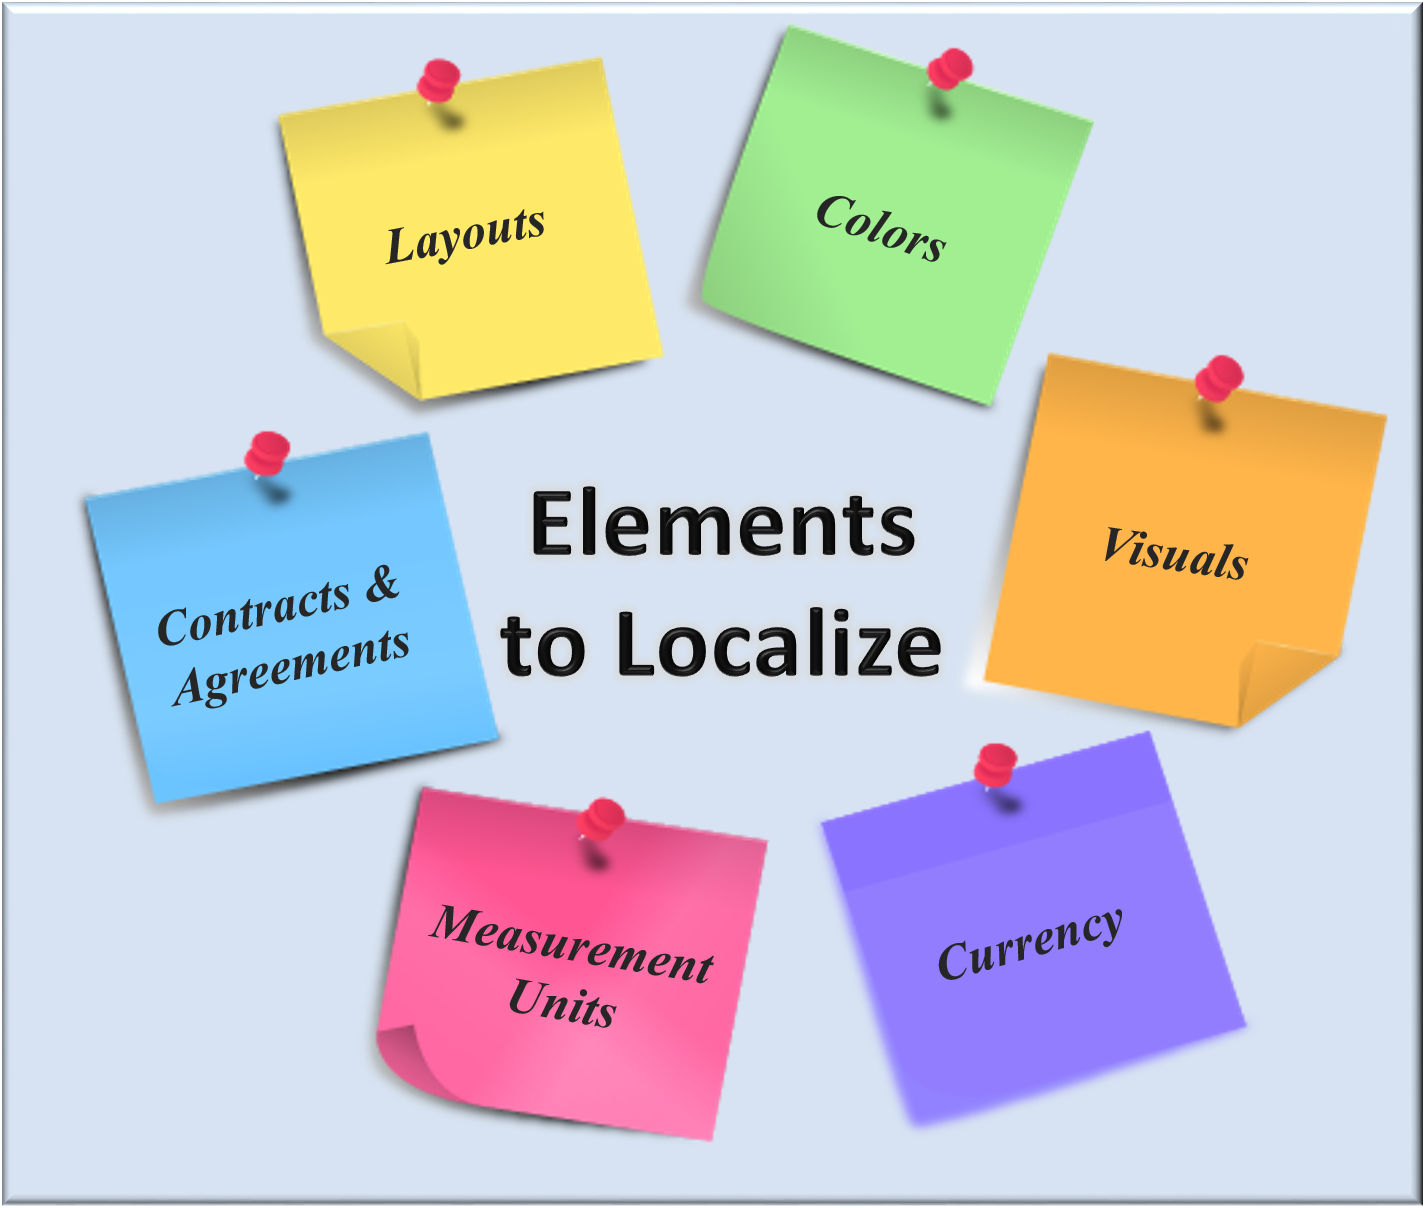 Elements to Localize